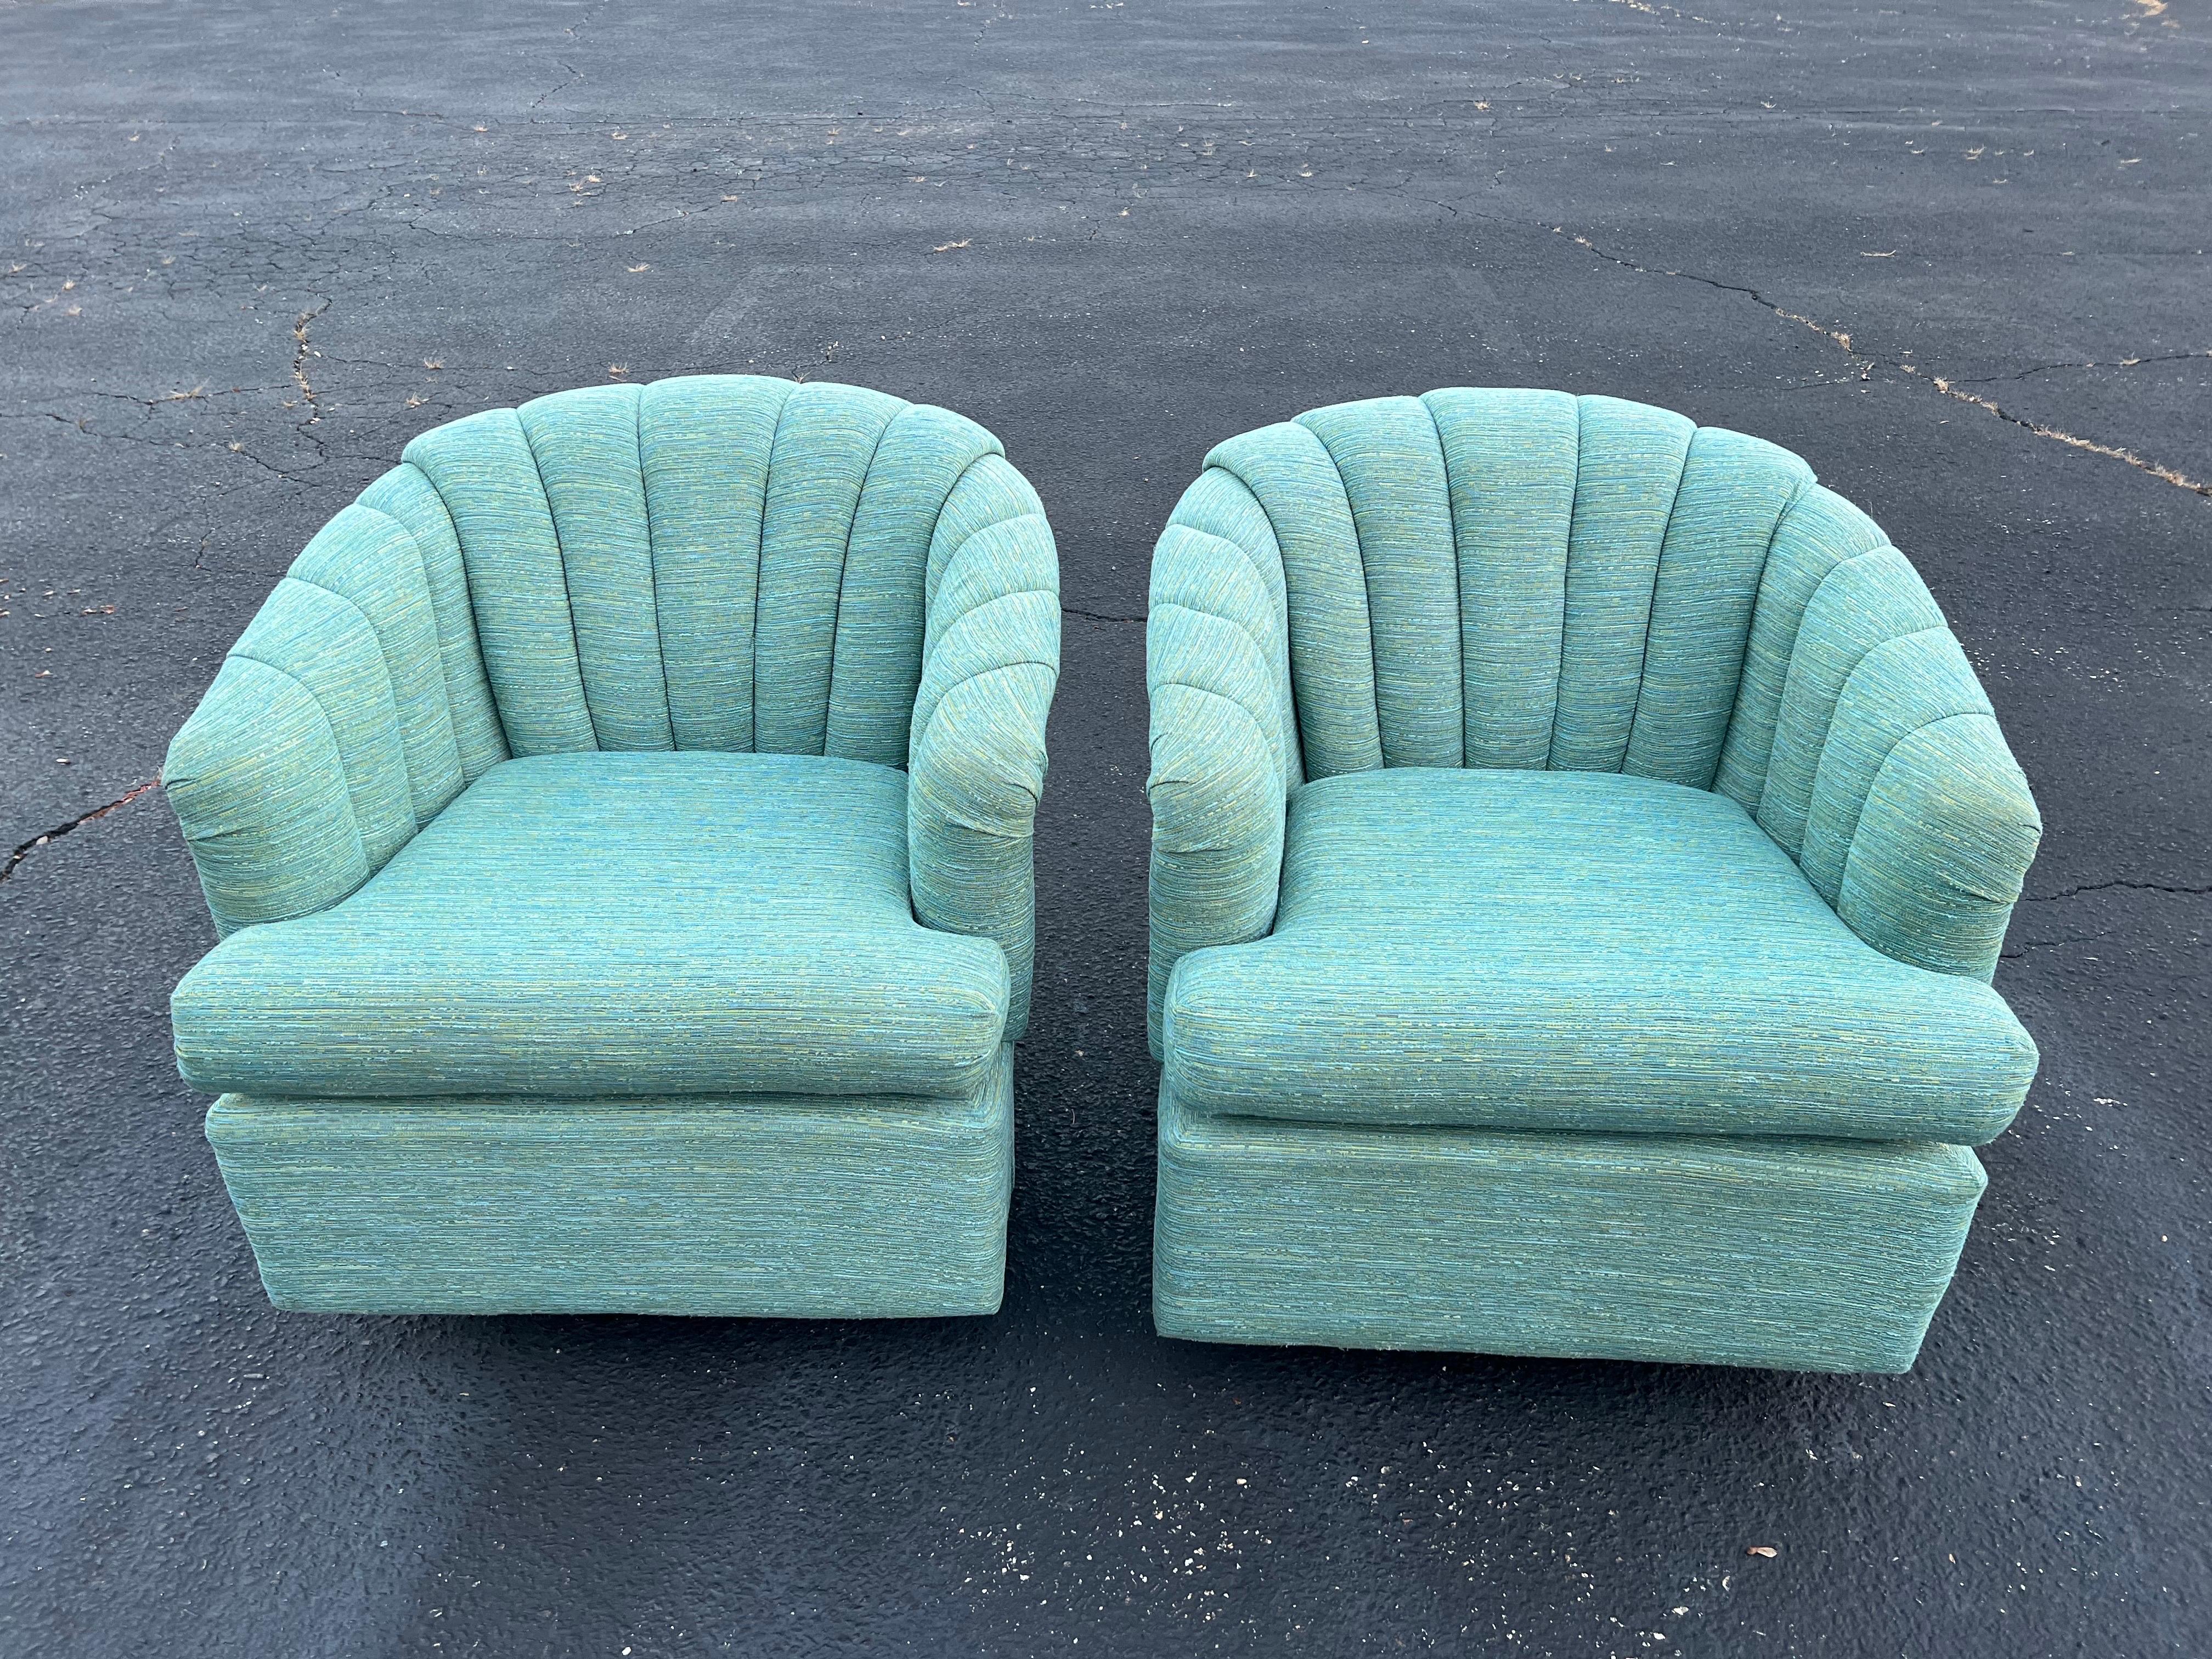 Pair of Turquoise Channel Back Swivel Chairs  In Good Condition For Sale In Redding, CT